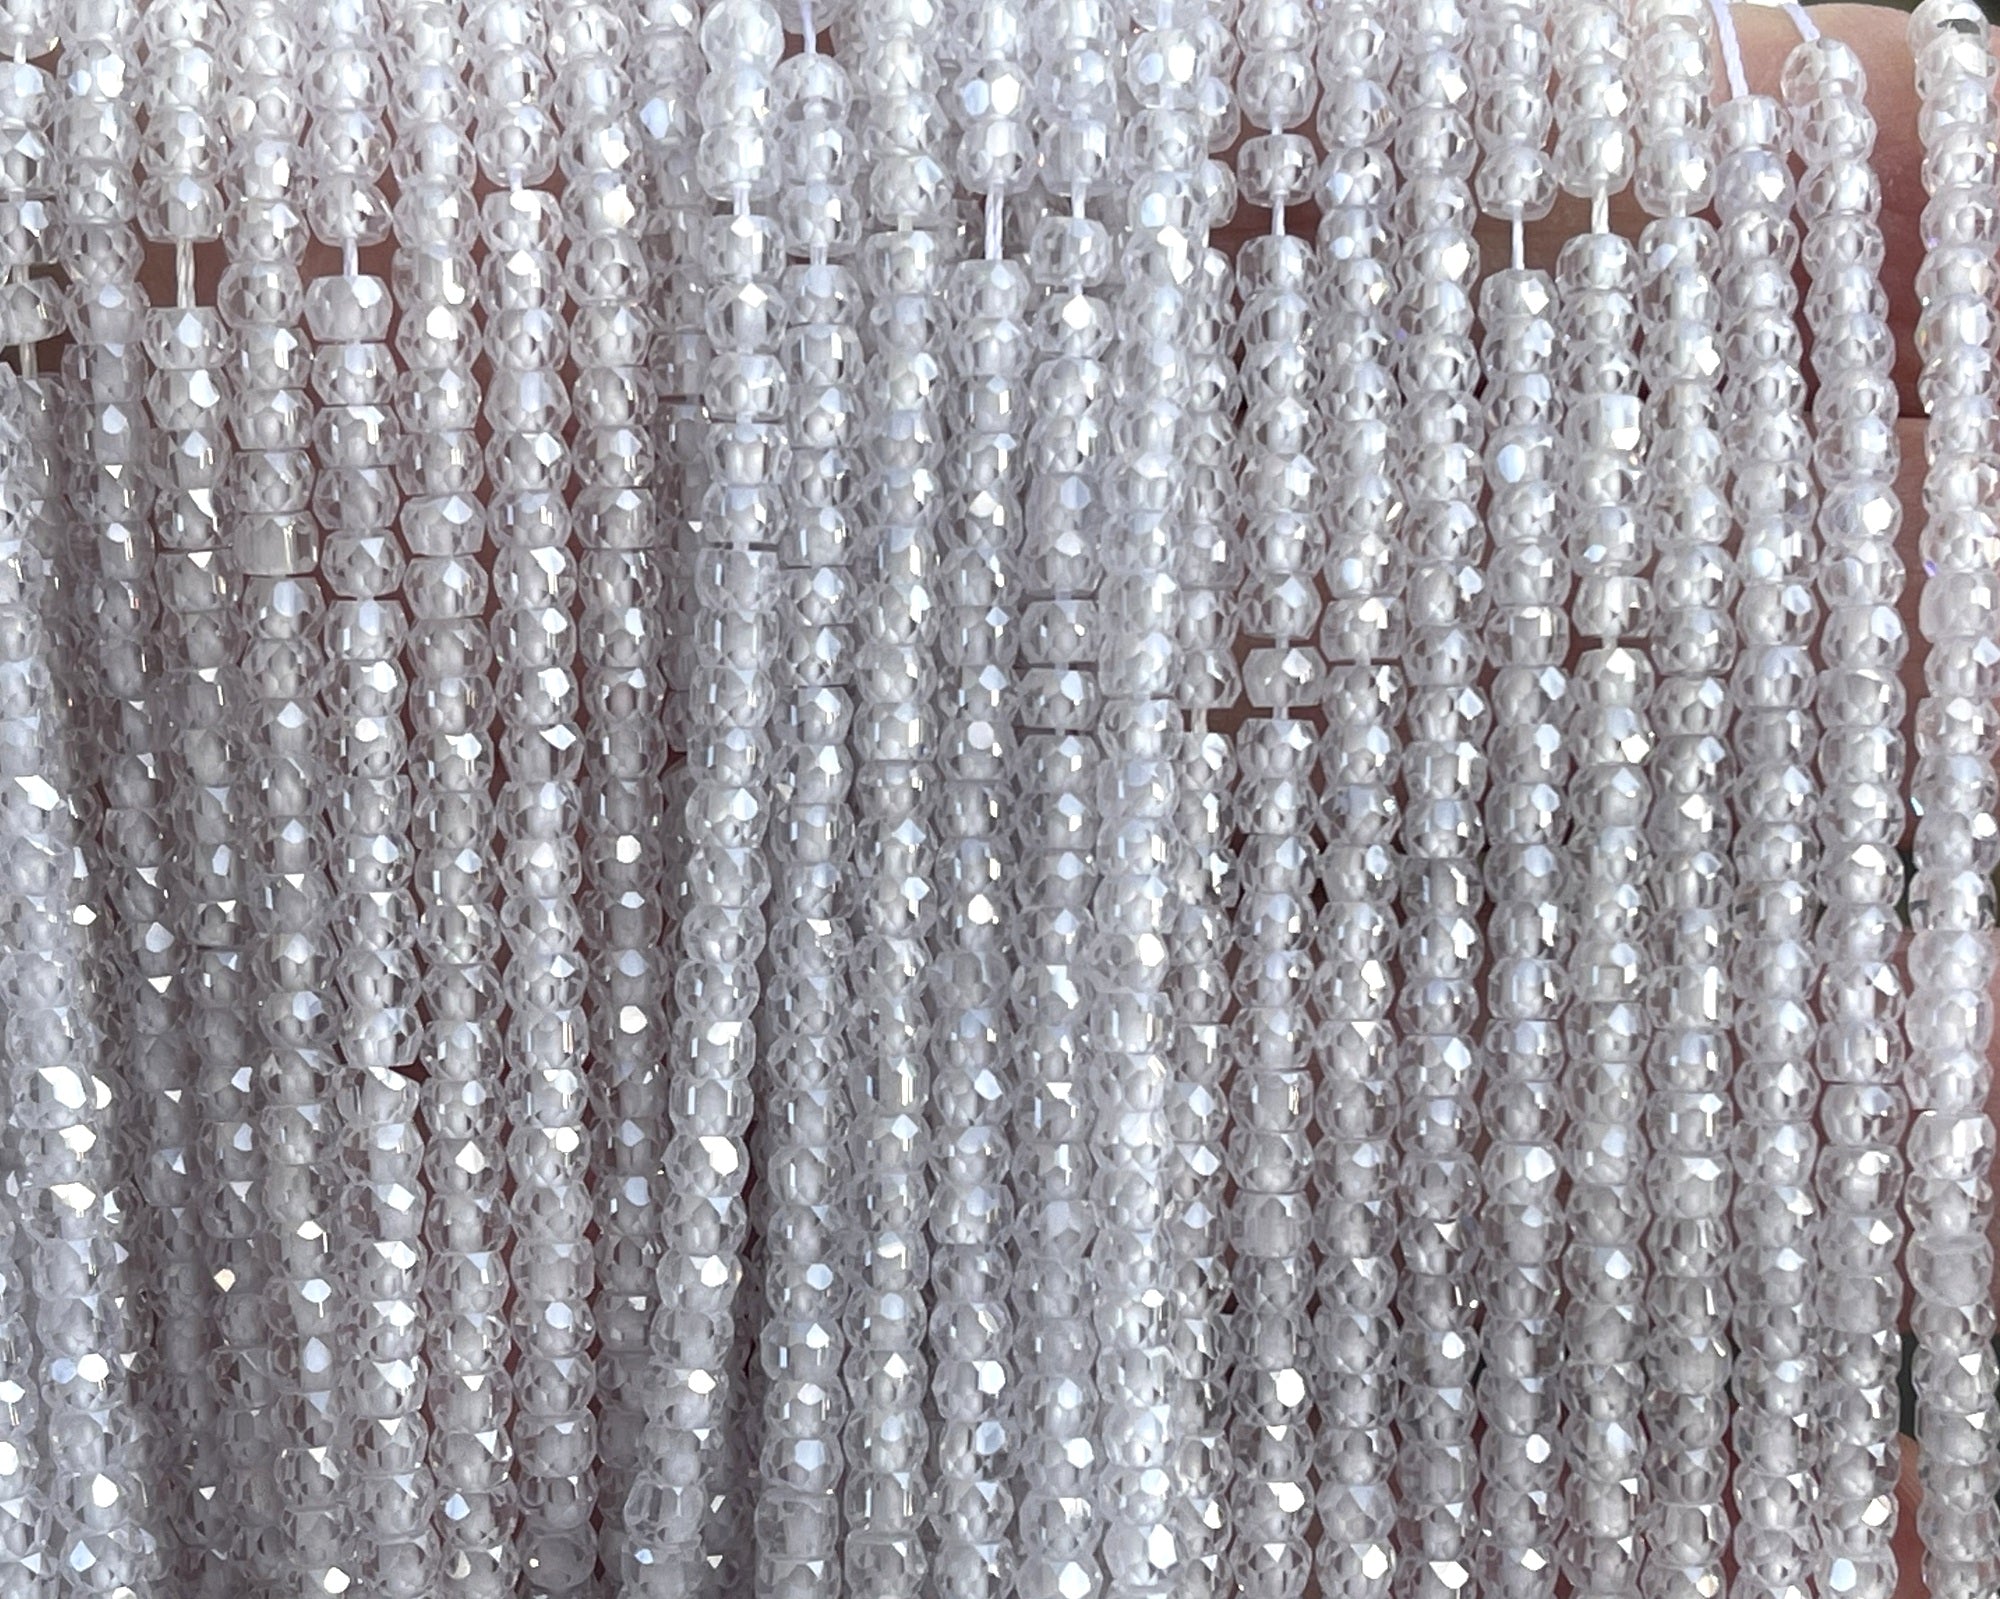 White Zircon 3x2mm rondelle micro faceted sparkling CZ beads 15" strand